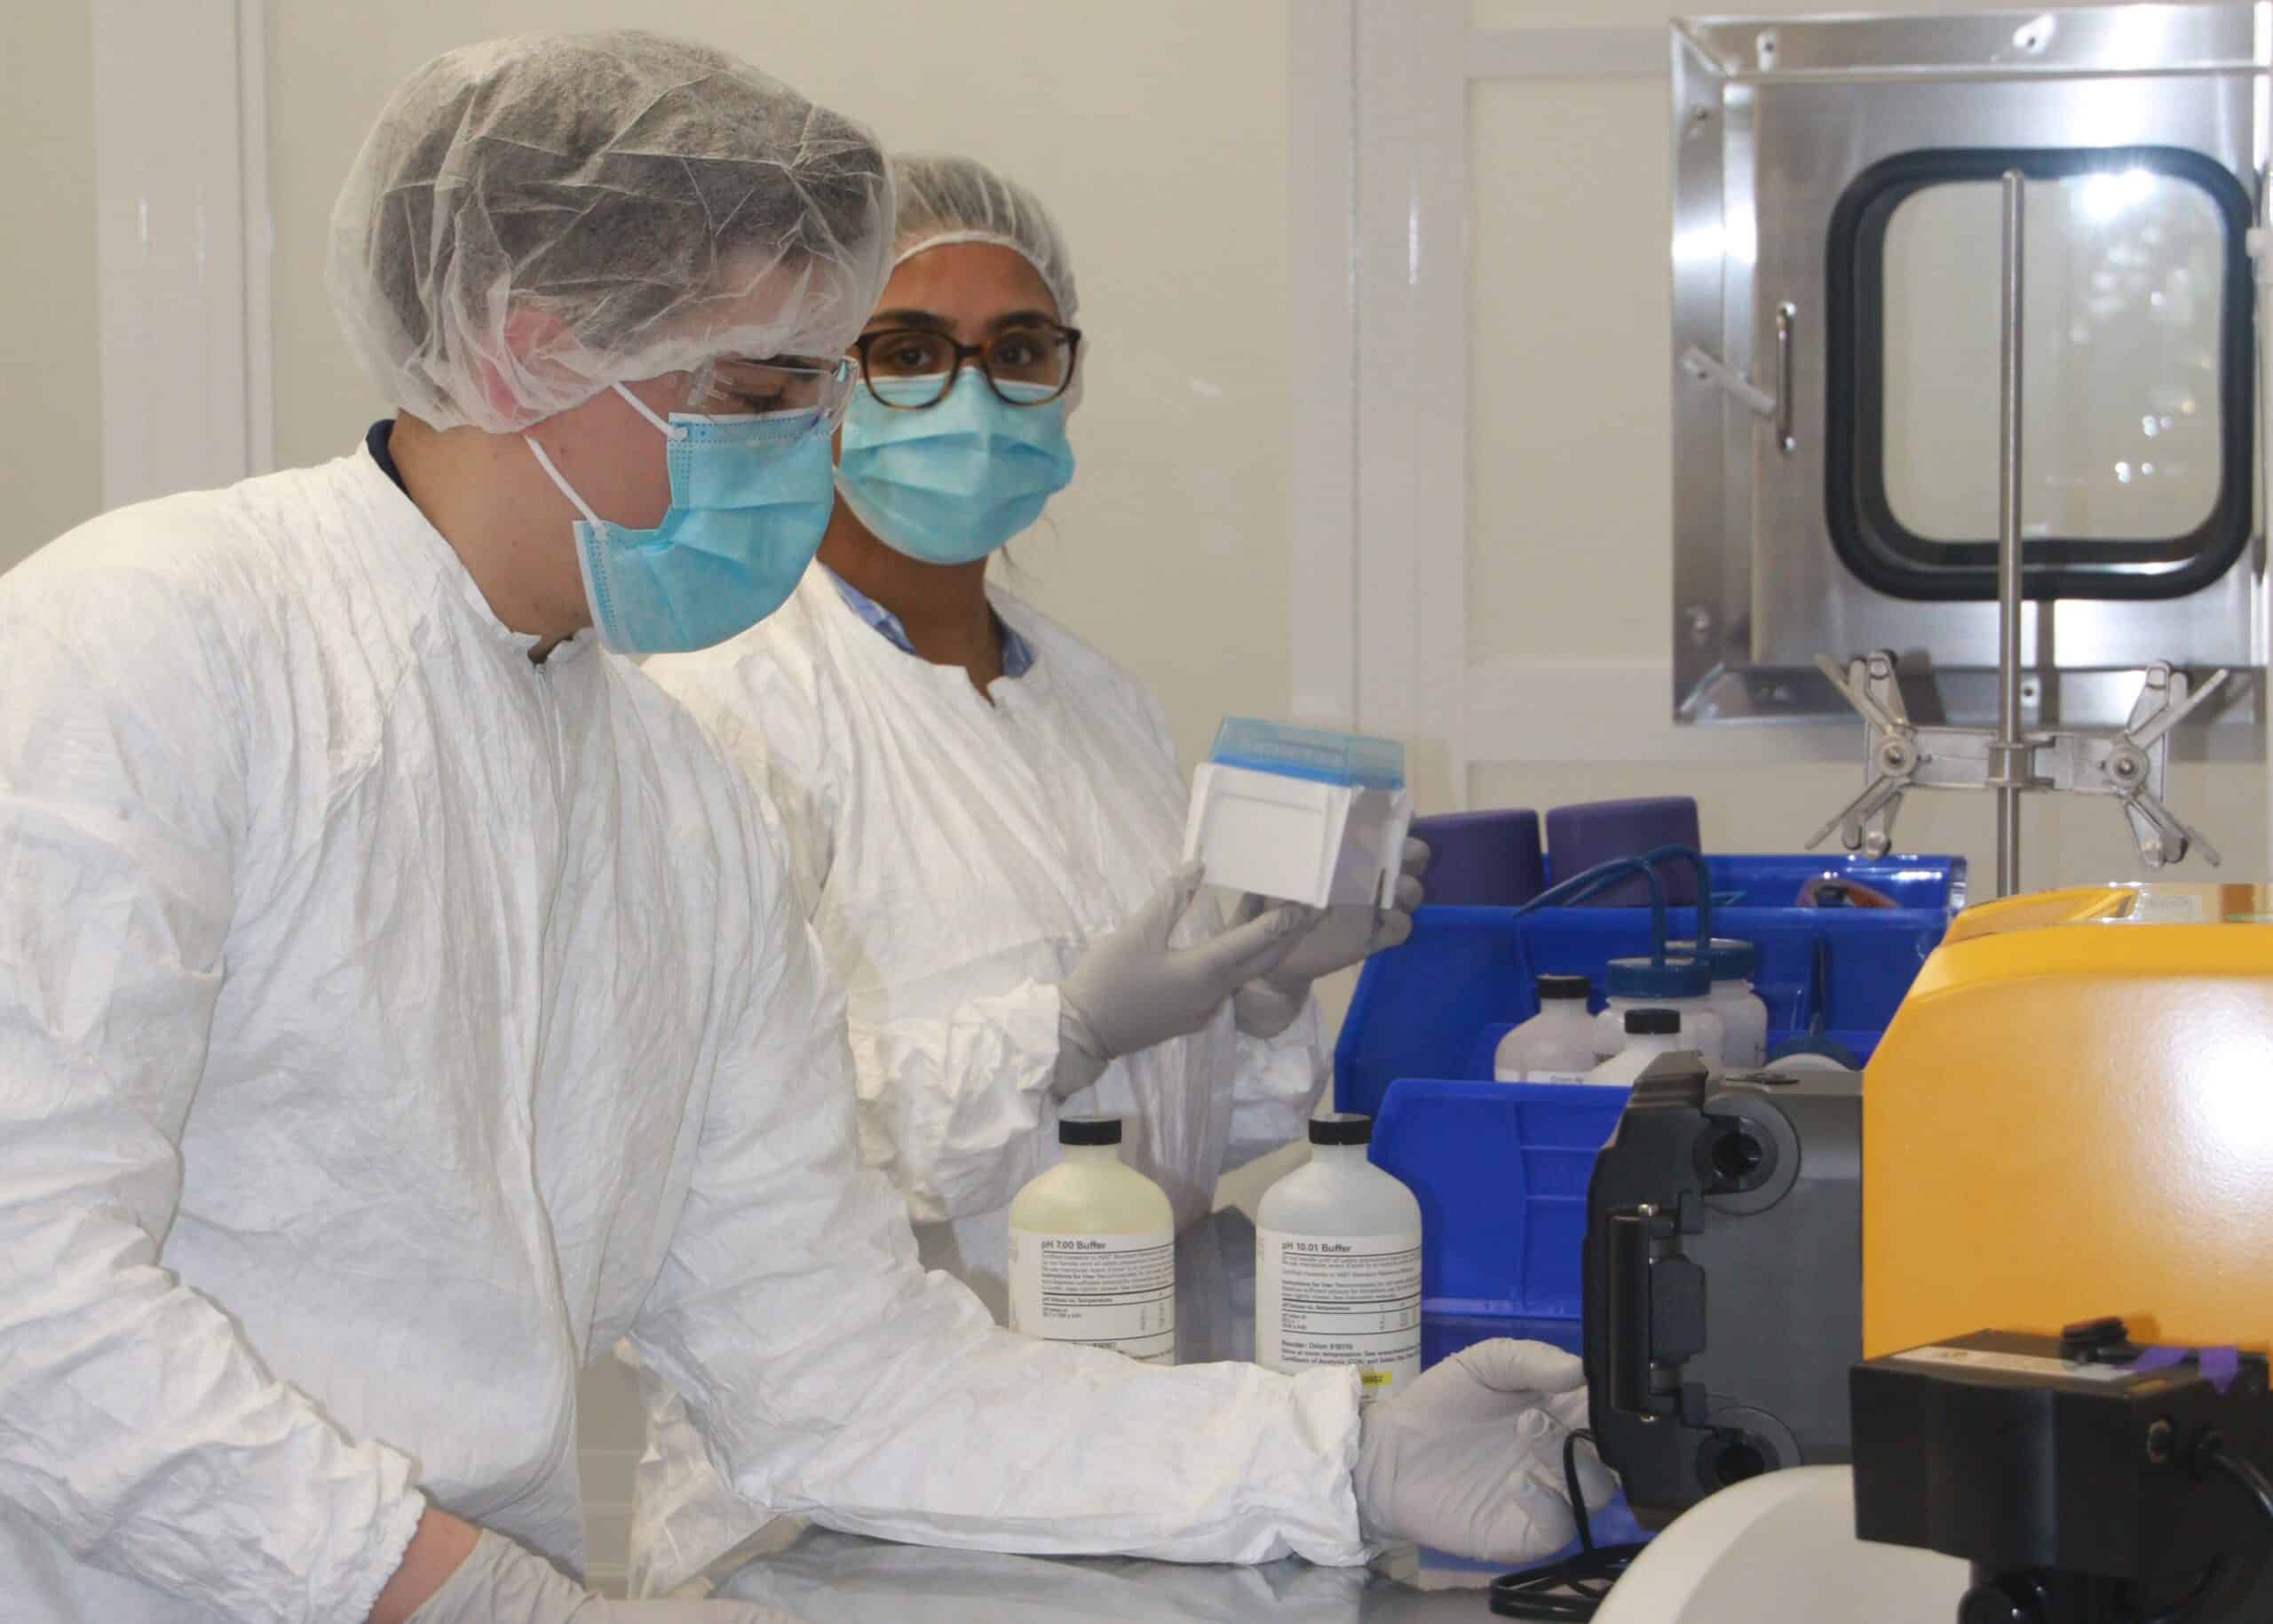 Lab technicians with hair nets and face coverings operating lab equipment.